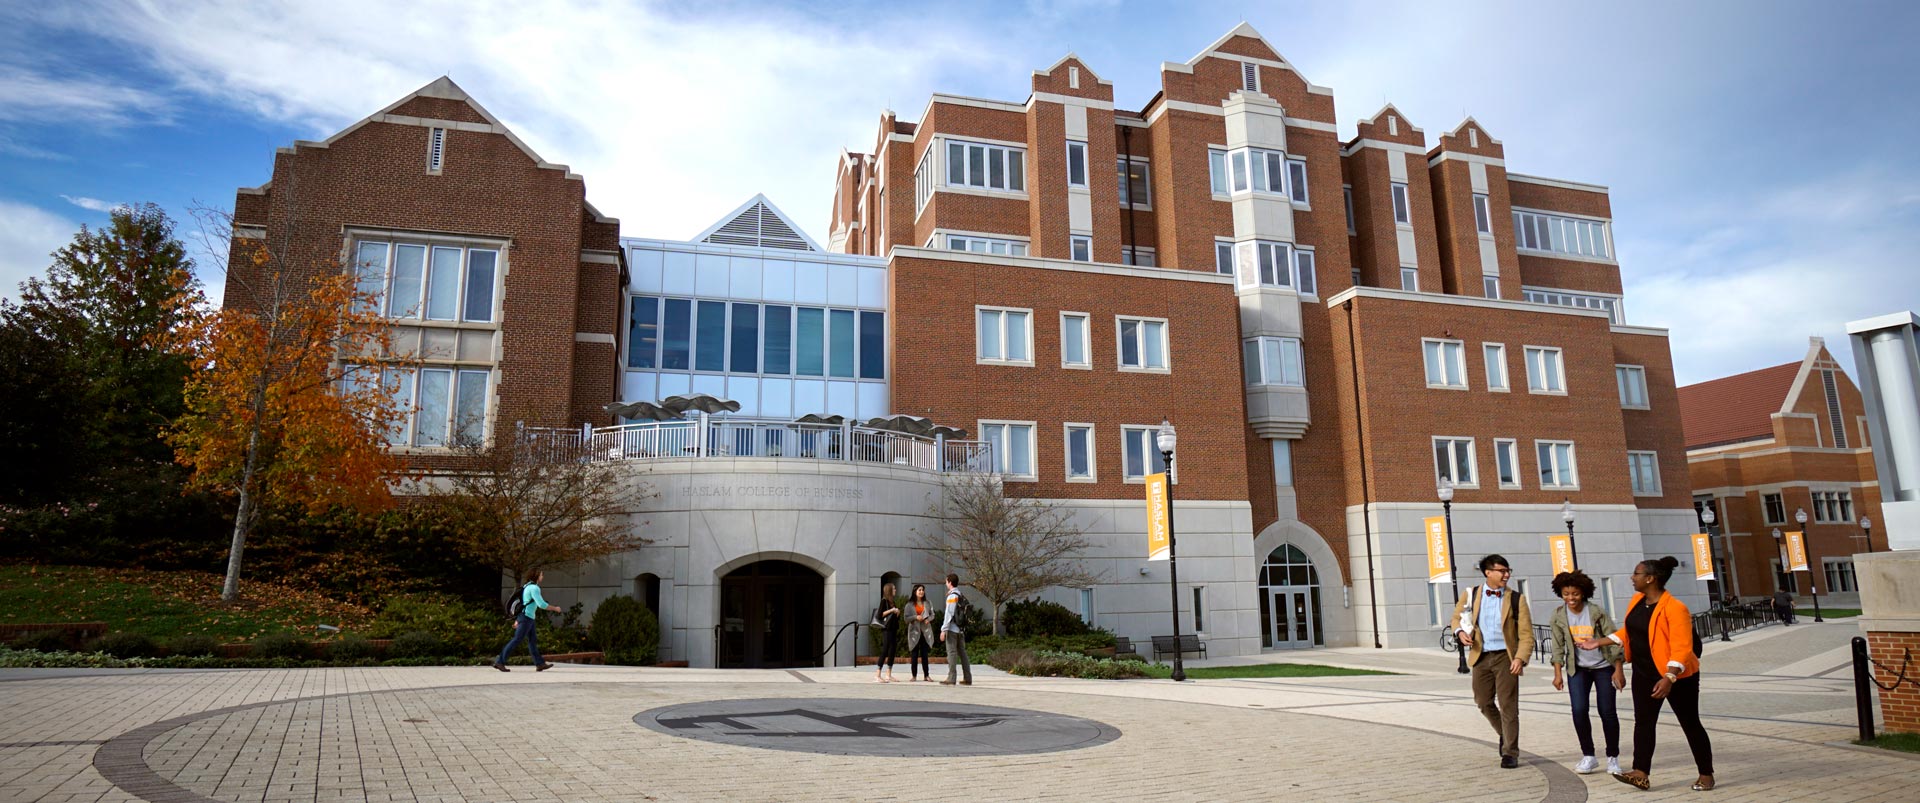 The Haslam College of Business Building on the University of Tennessee, Knoxville campus.